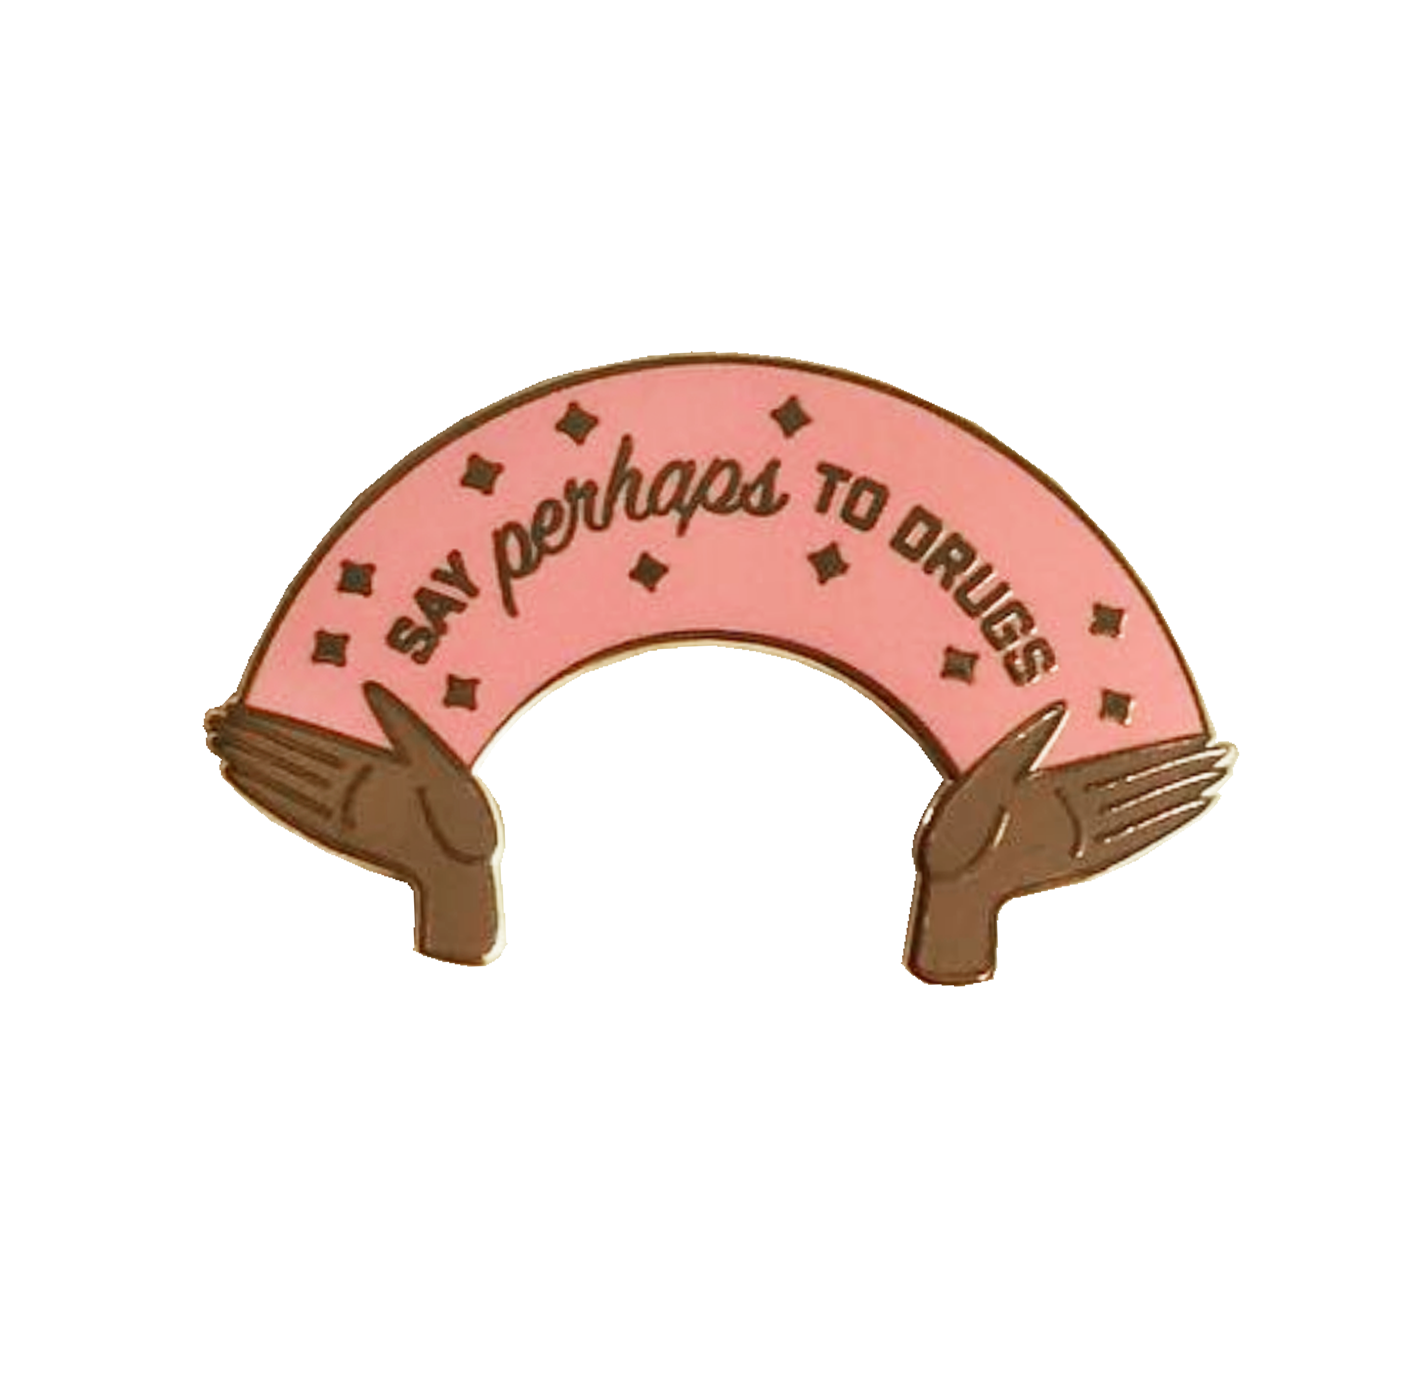 Say Perhaps to Drugs Pin